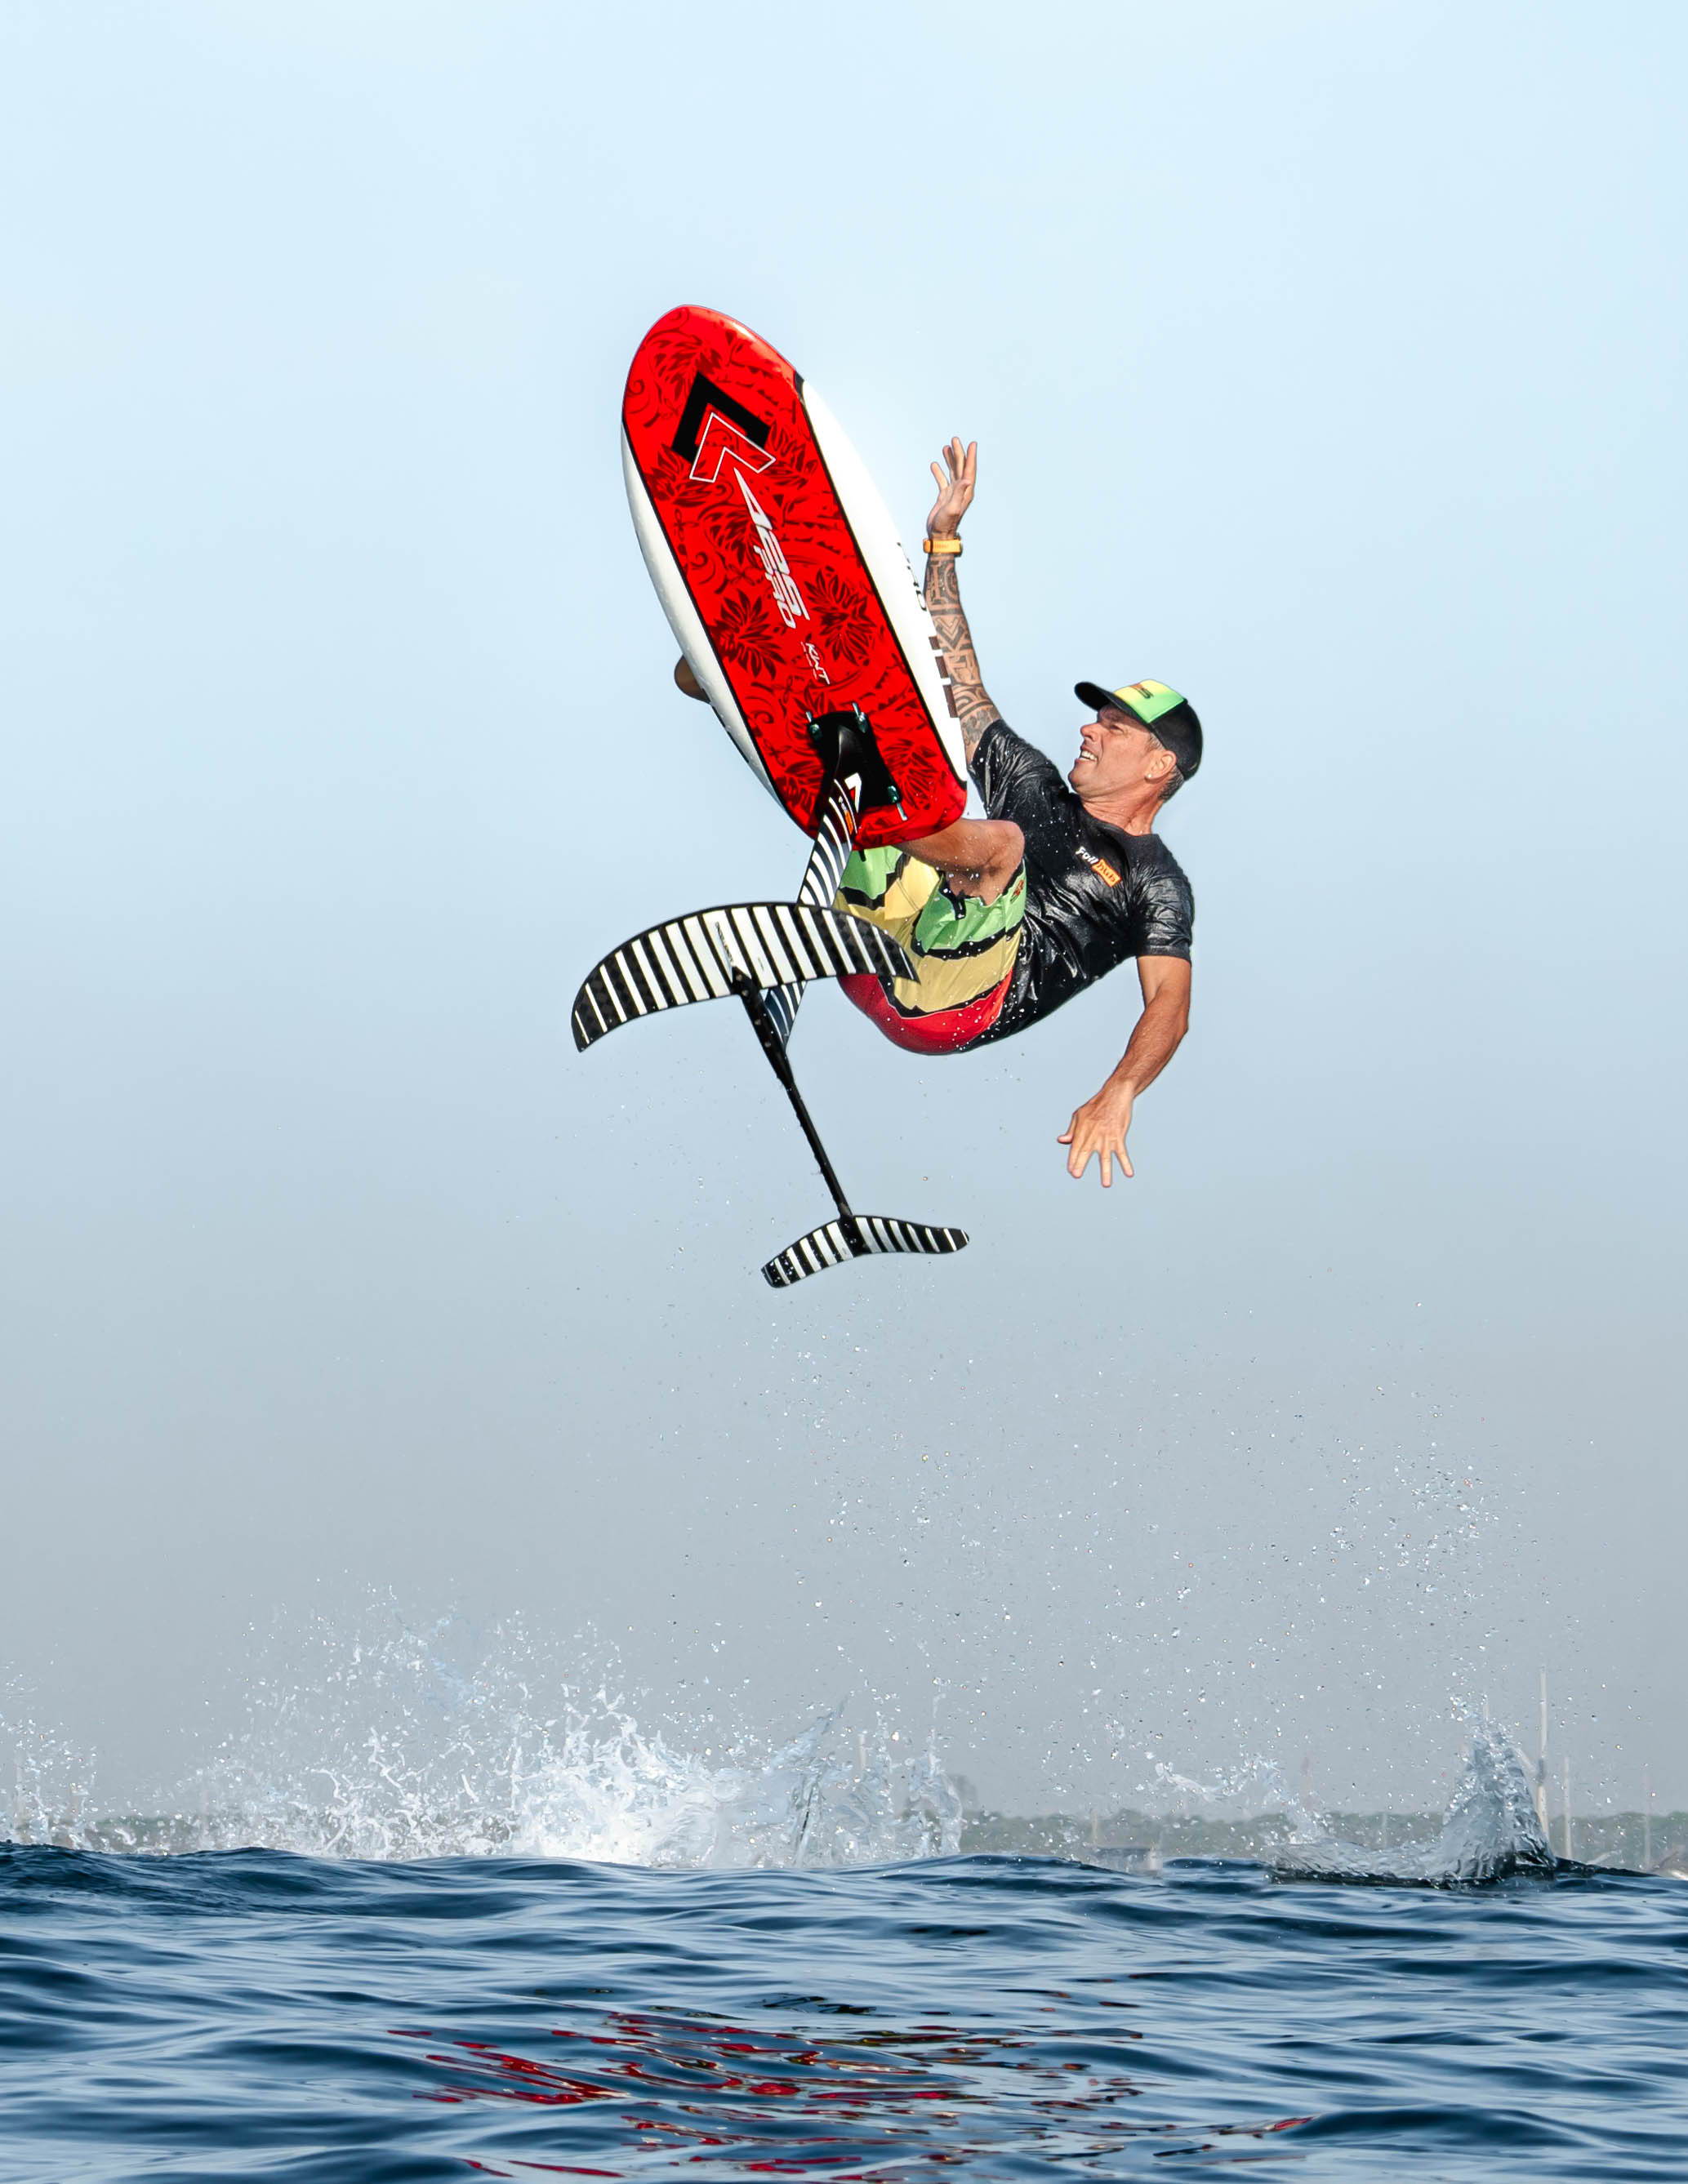 425pro board in action: a man jumping in the air from the blue sea water 